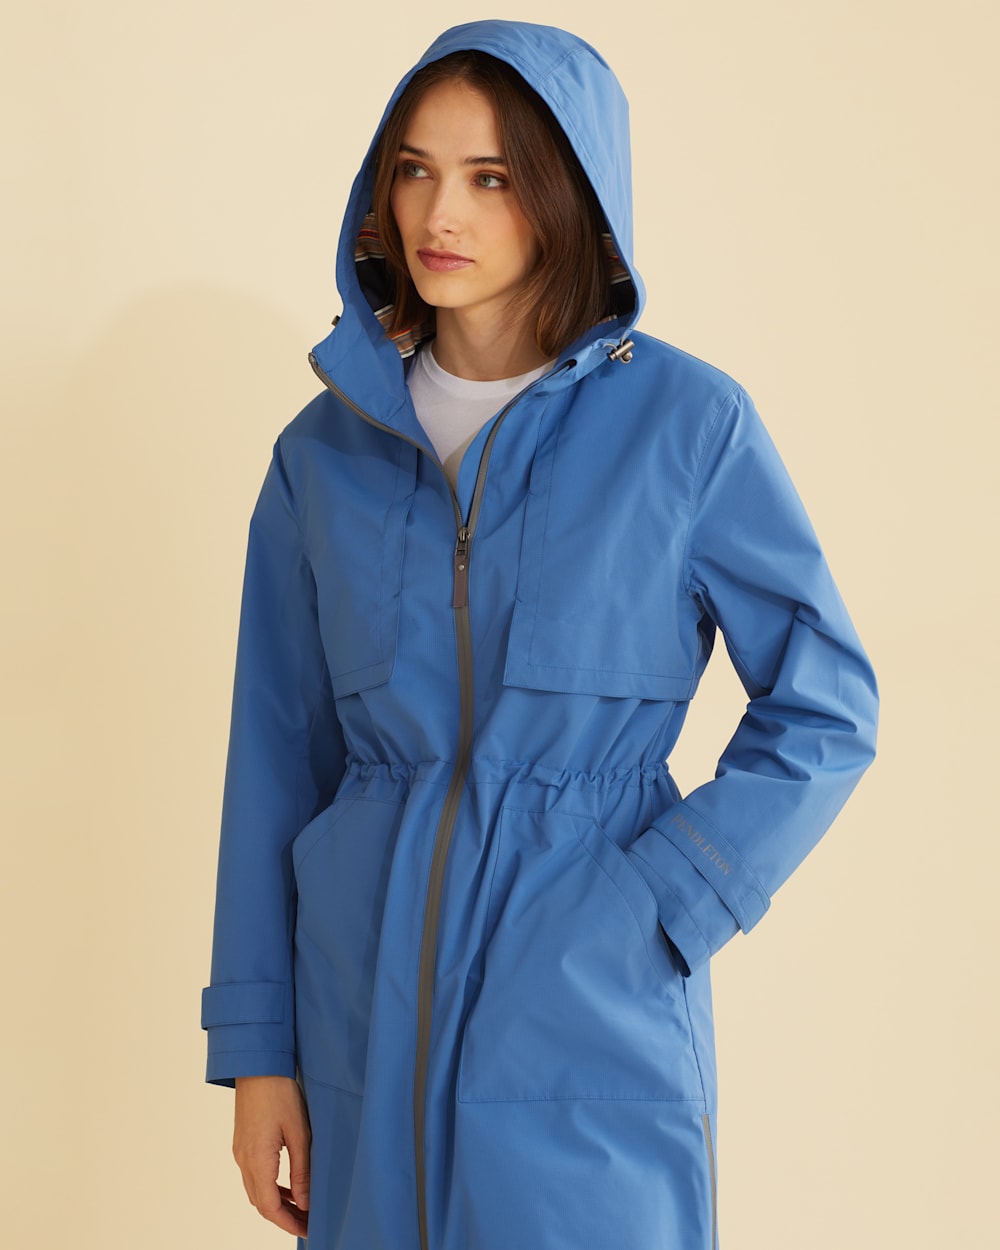 ALTERNATE VIEW OF WOMEN'S PACIFICA MINI RIPSTOP TRENCH IN MARINE BLUE image number 2